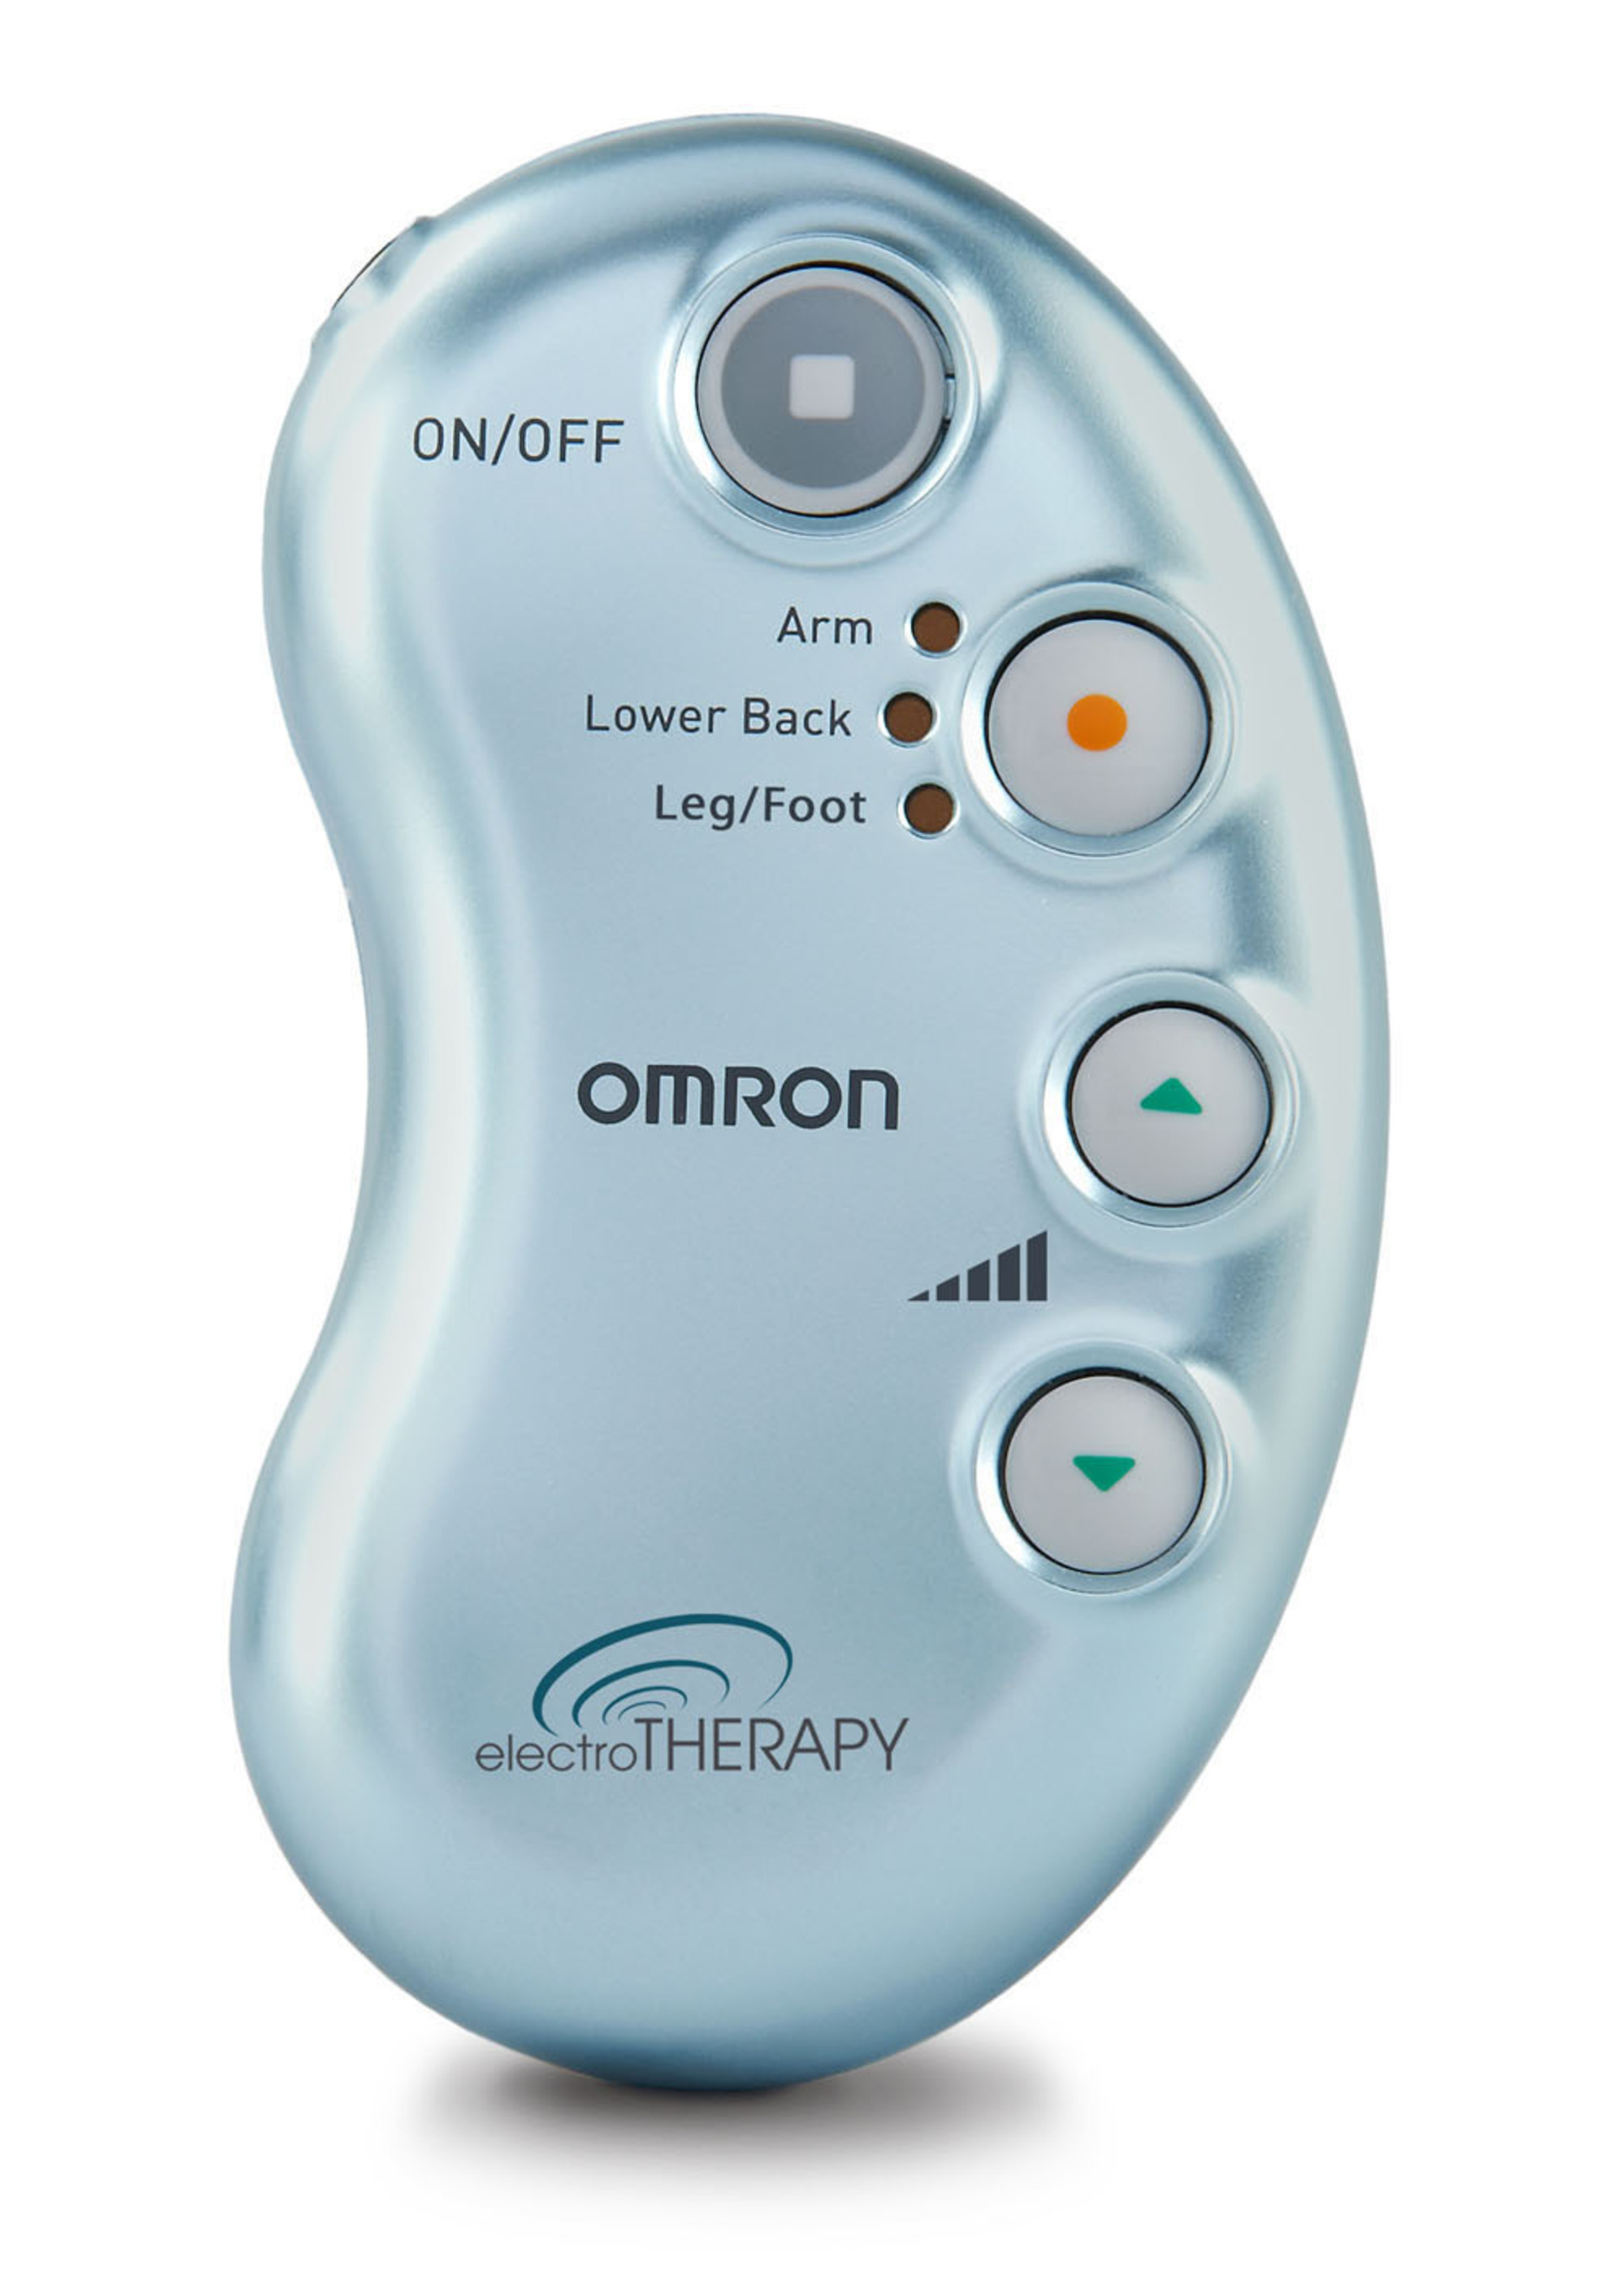 Omron Healthcare Announces New Over-The-Counter Electrotherapy Device